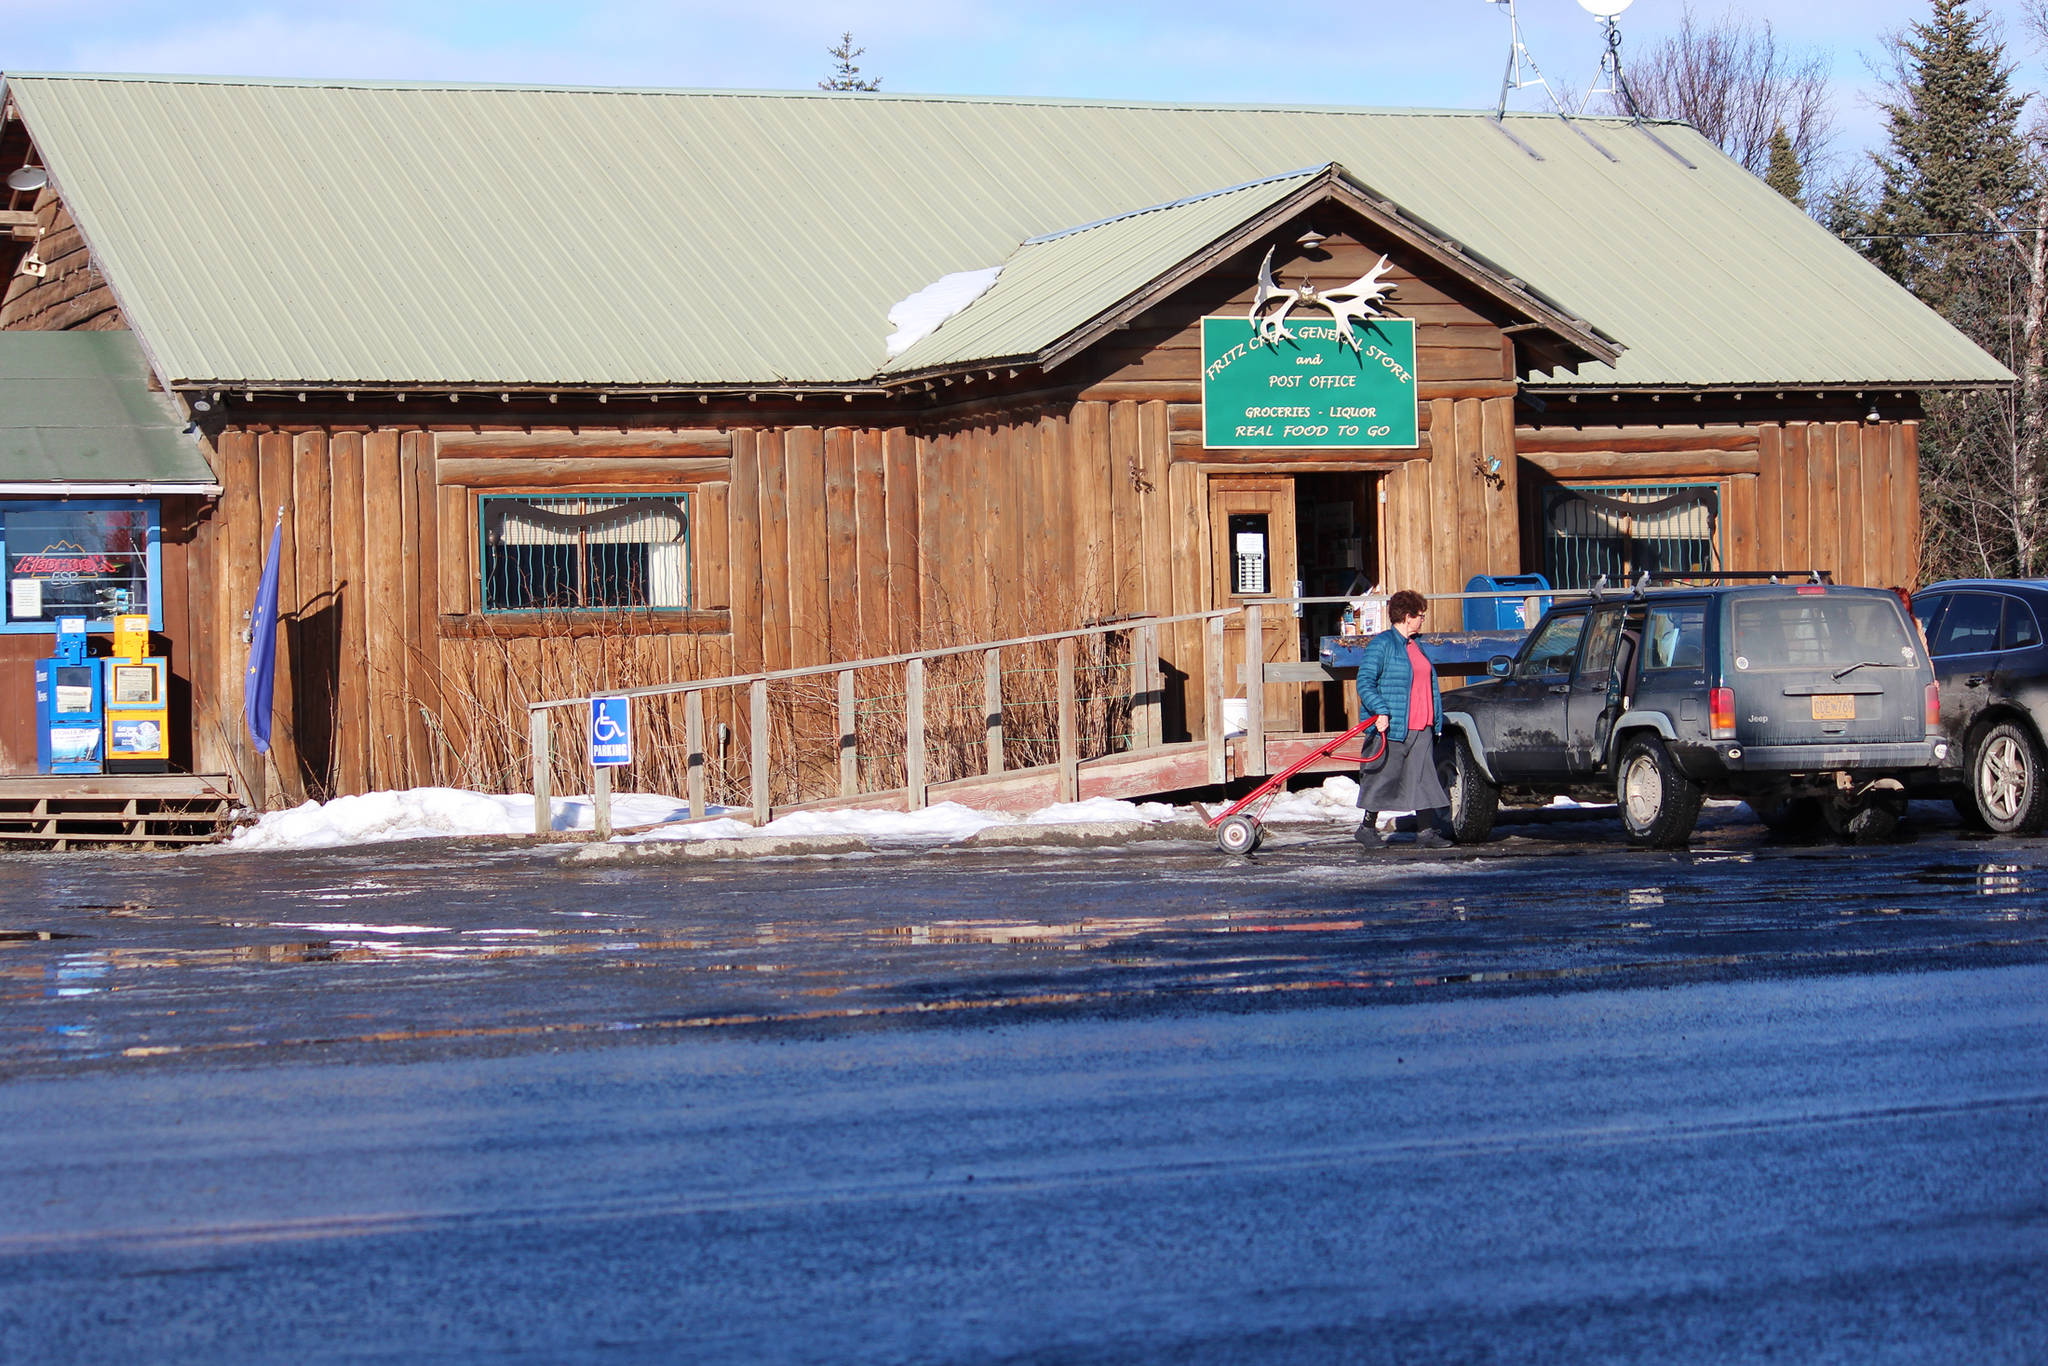 The Fritz Creek General Store, shown here on Feb. 26, 2019 is located on East End Road near Homer, Alaska. (Photo by Megan Pacer/Homer News)